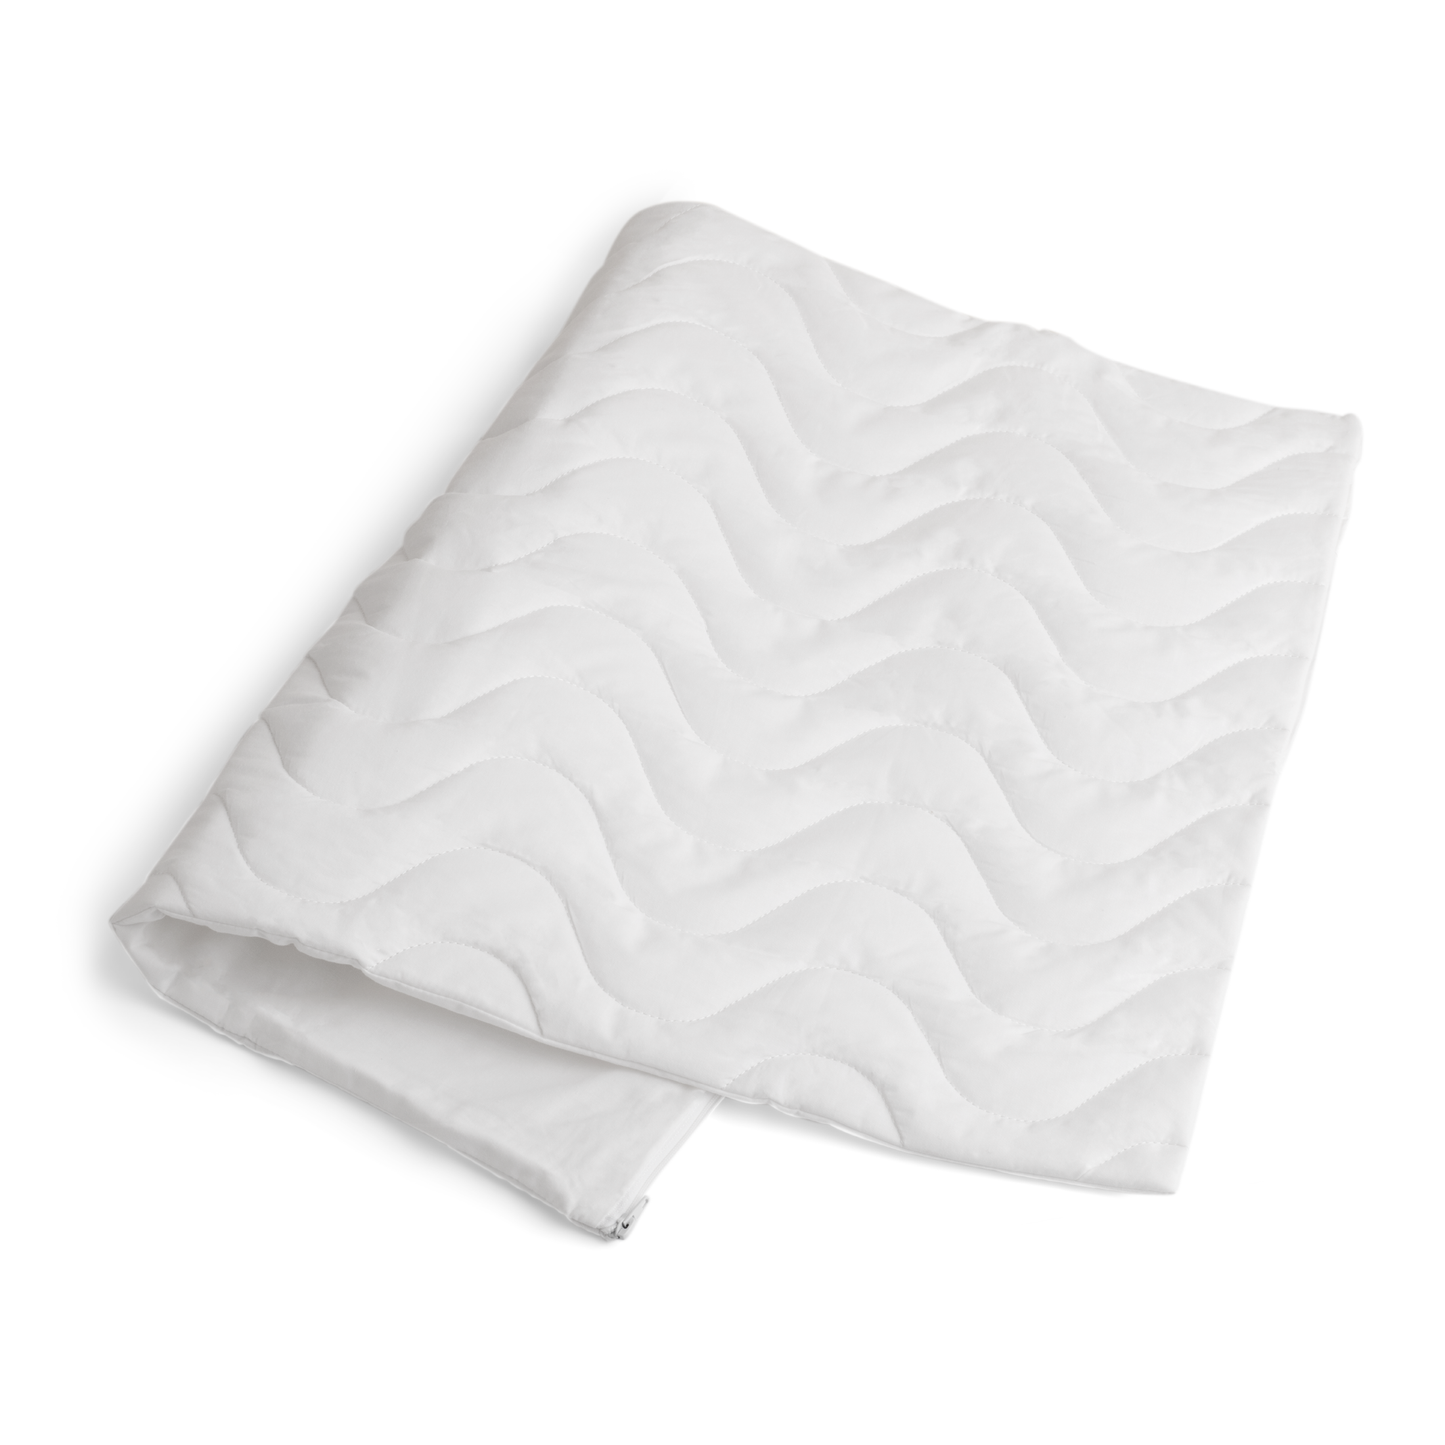 100% Cotton Quilted Pillow Protector - Give your water pillow an extra layer of comfort